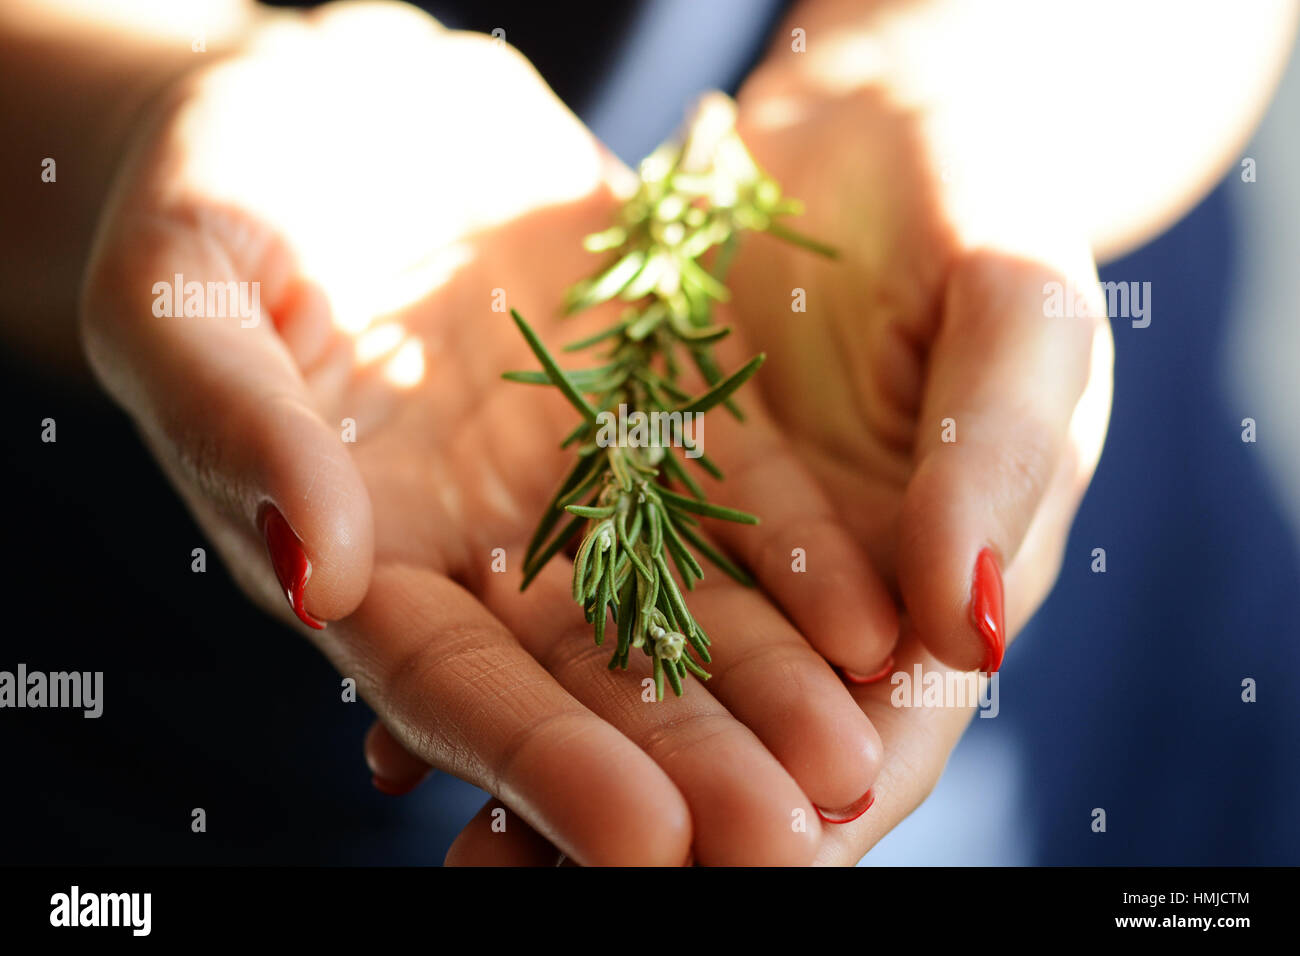 Woman holding a fresh rosemary brunch in her cupped hands Stock Photo